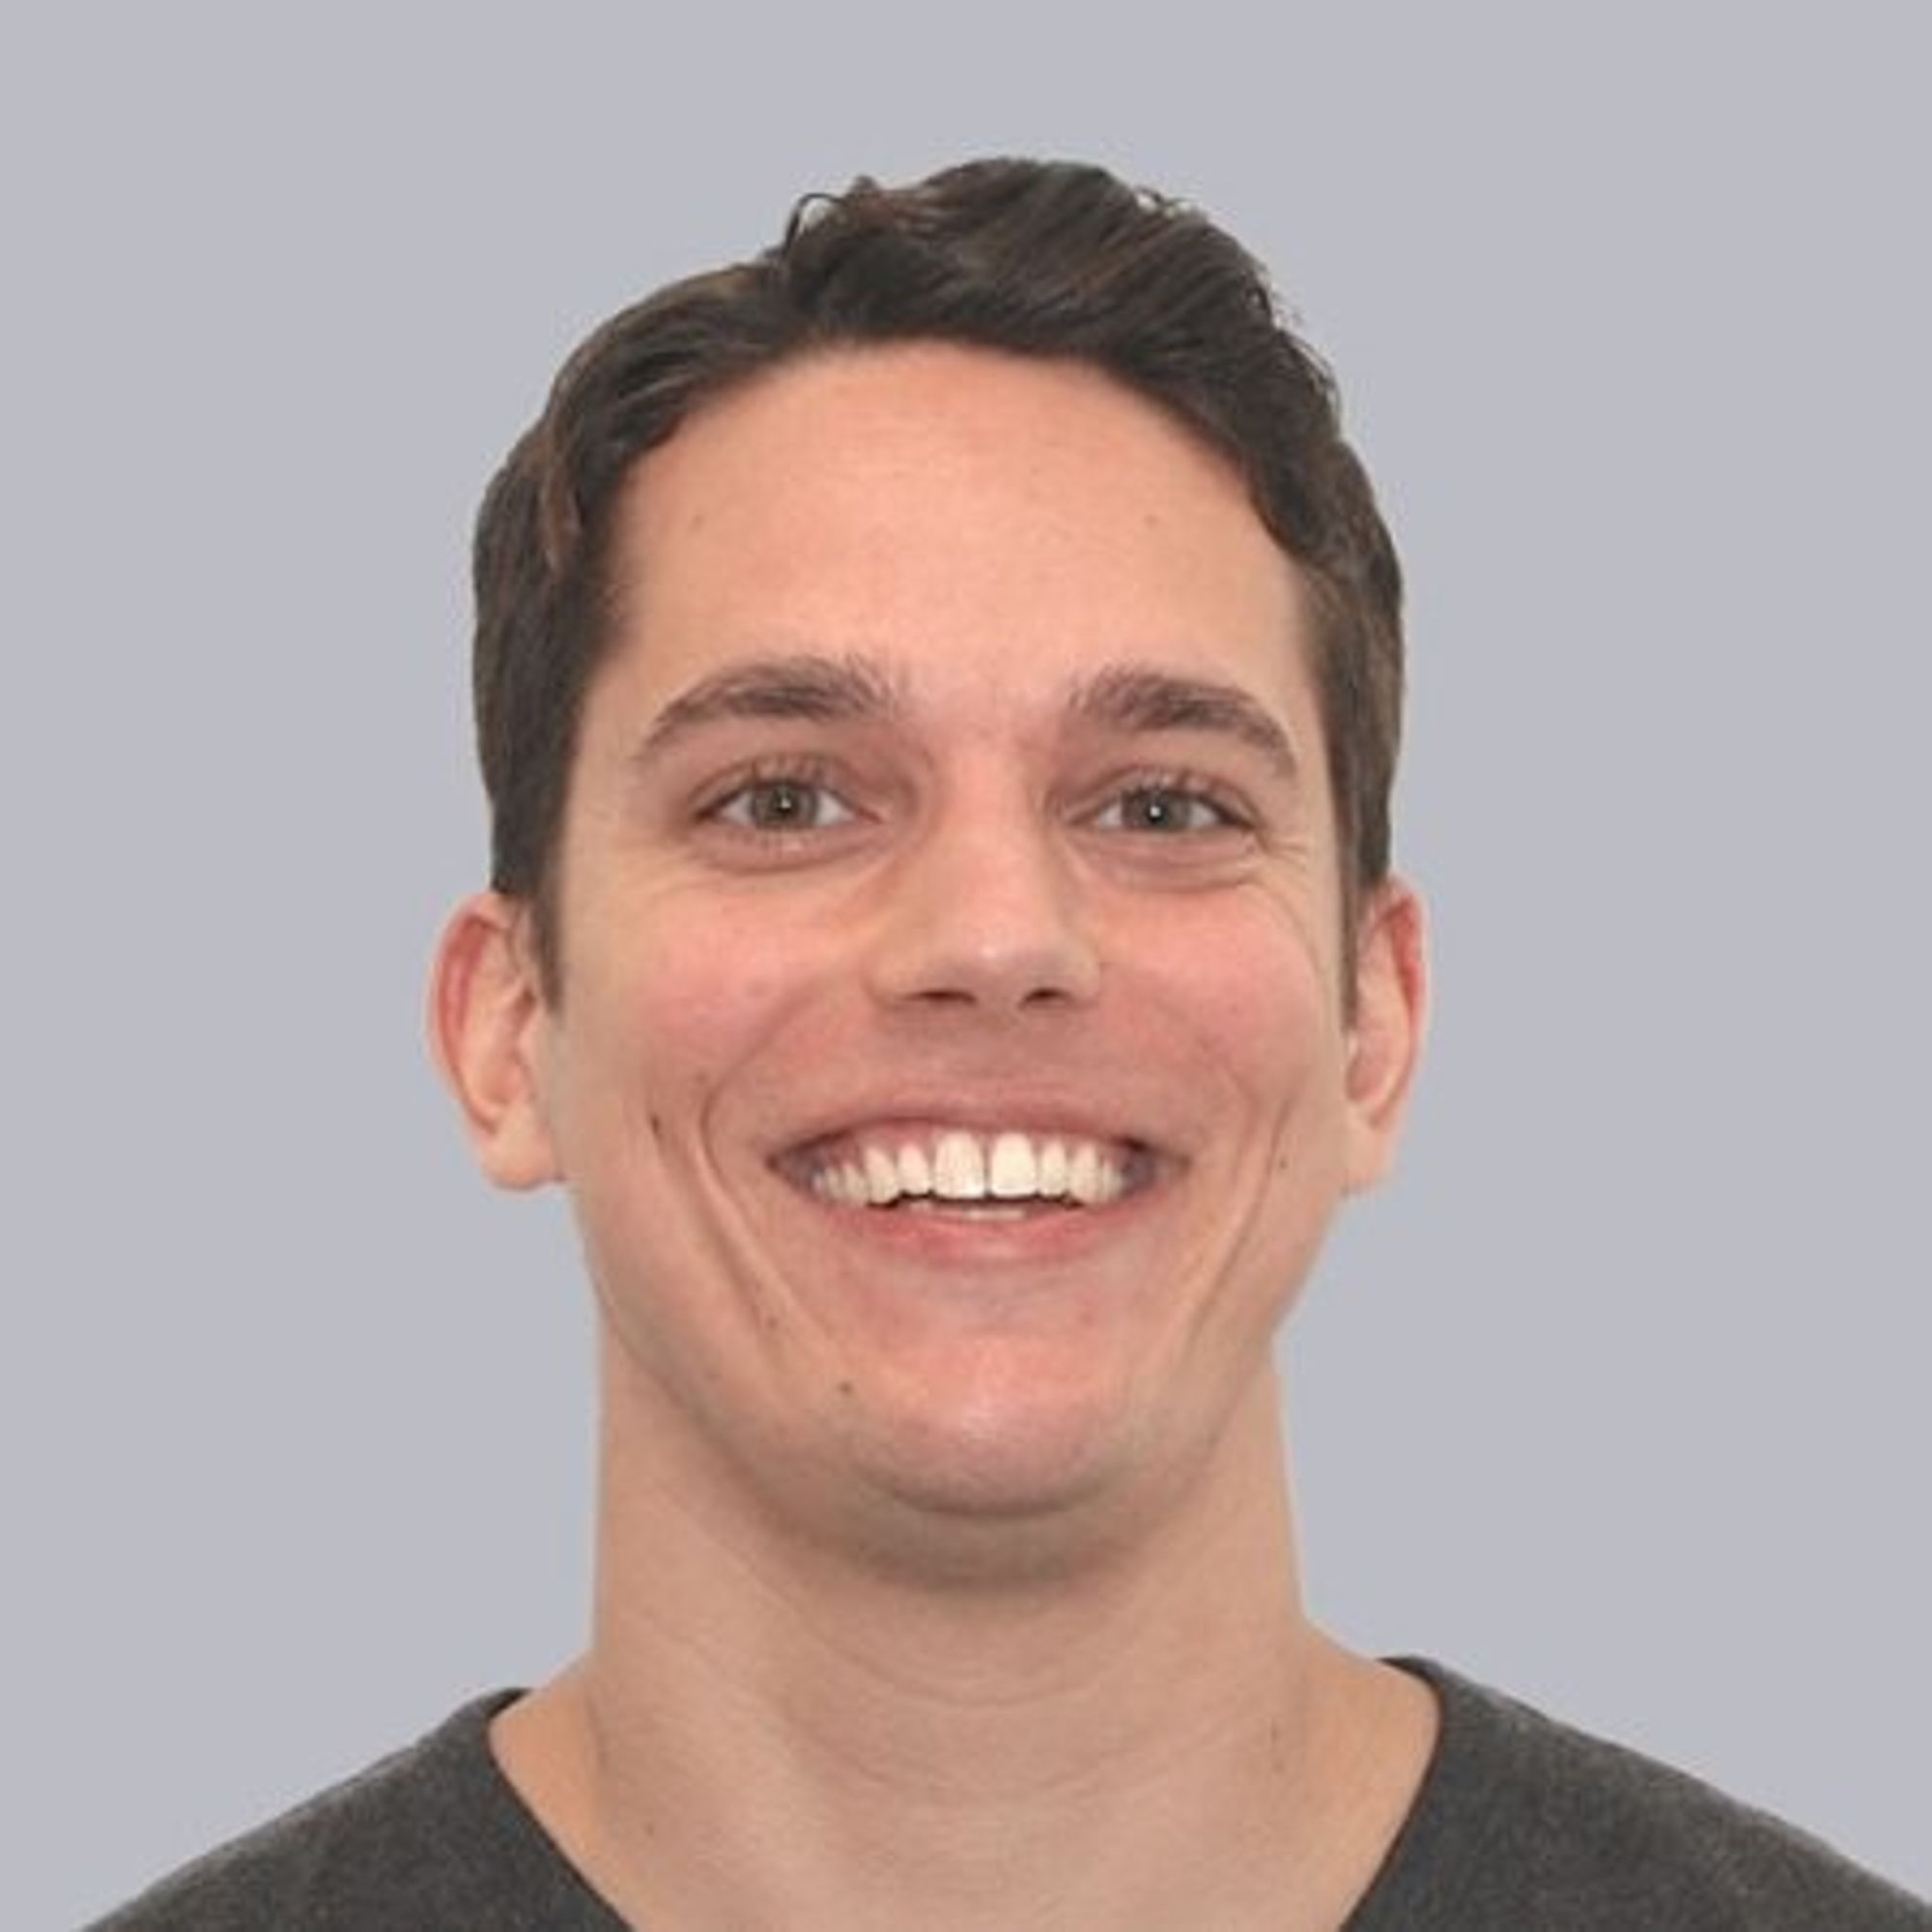 Etienne Tripier
Software Engineer
Former Airbnb Staff Software Engineer, Tech Lead for team of 20+ engineers • I love powerlifting, movies, and DoTA 2. In my spare time, I enjoy tinkering on the VVC (H.266) project